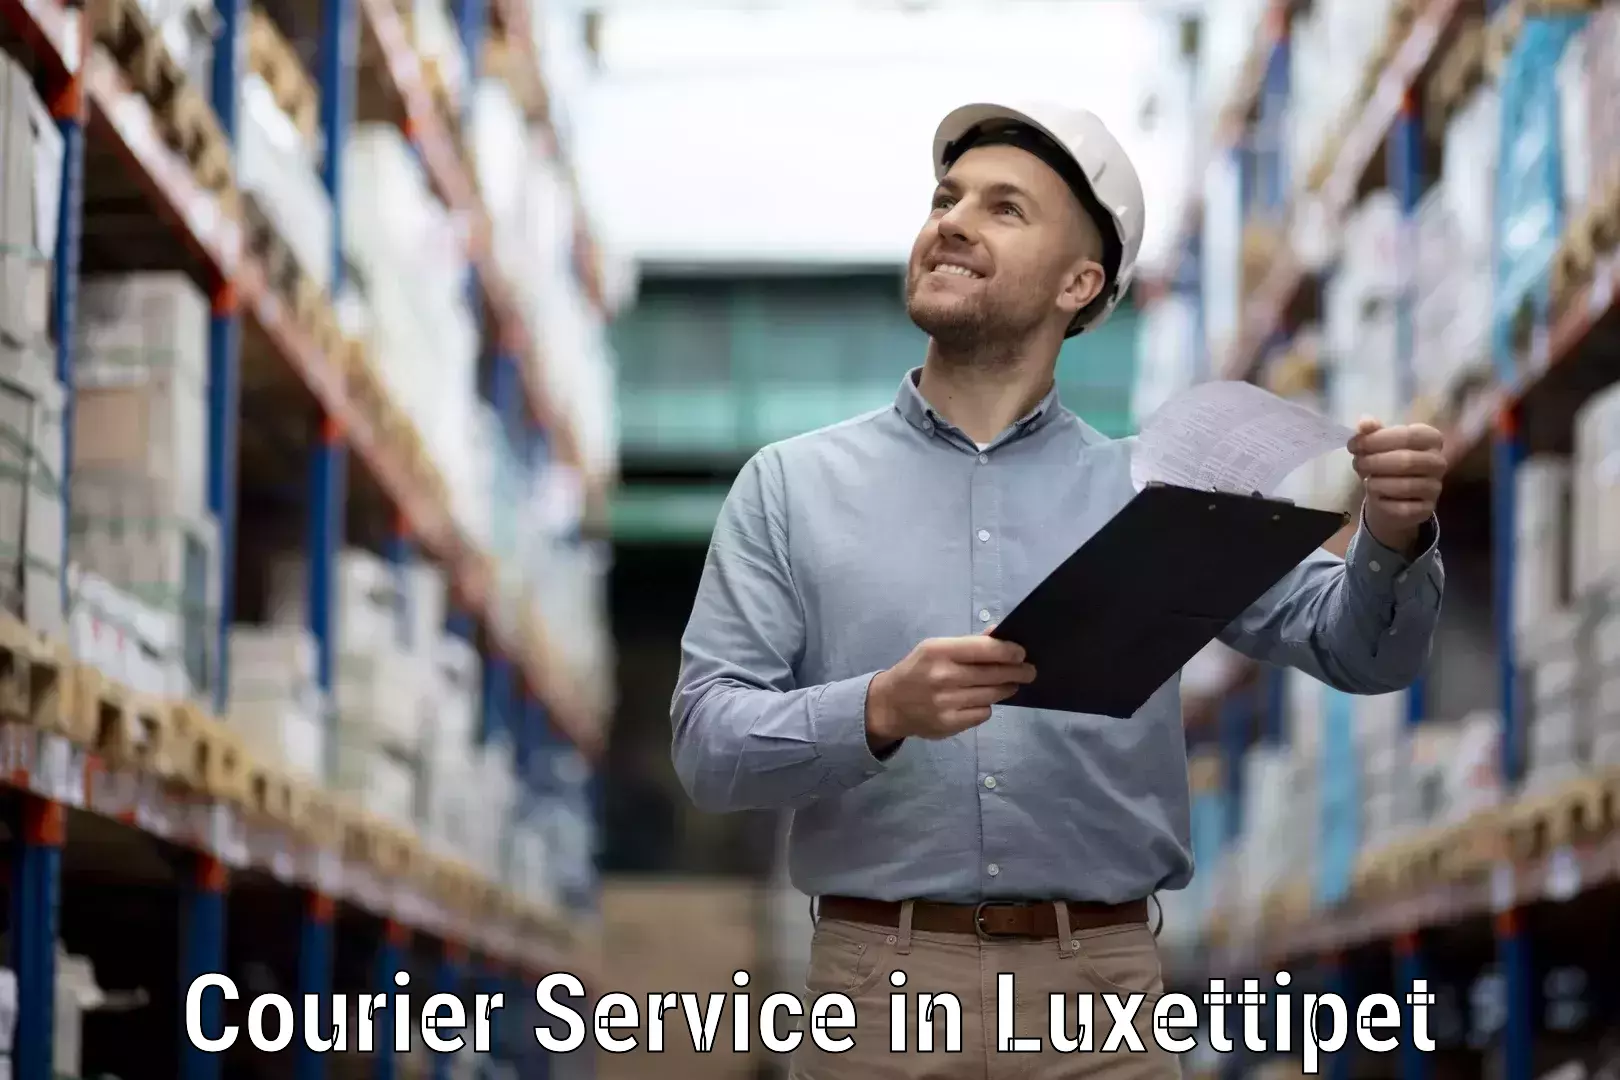 Enhanced shipping experience in Luxettipet